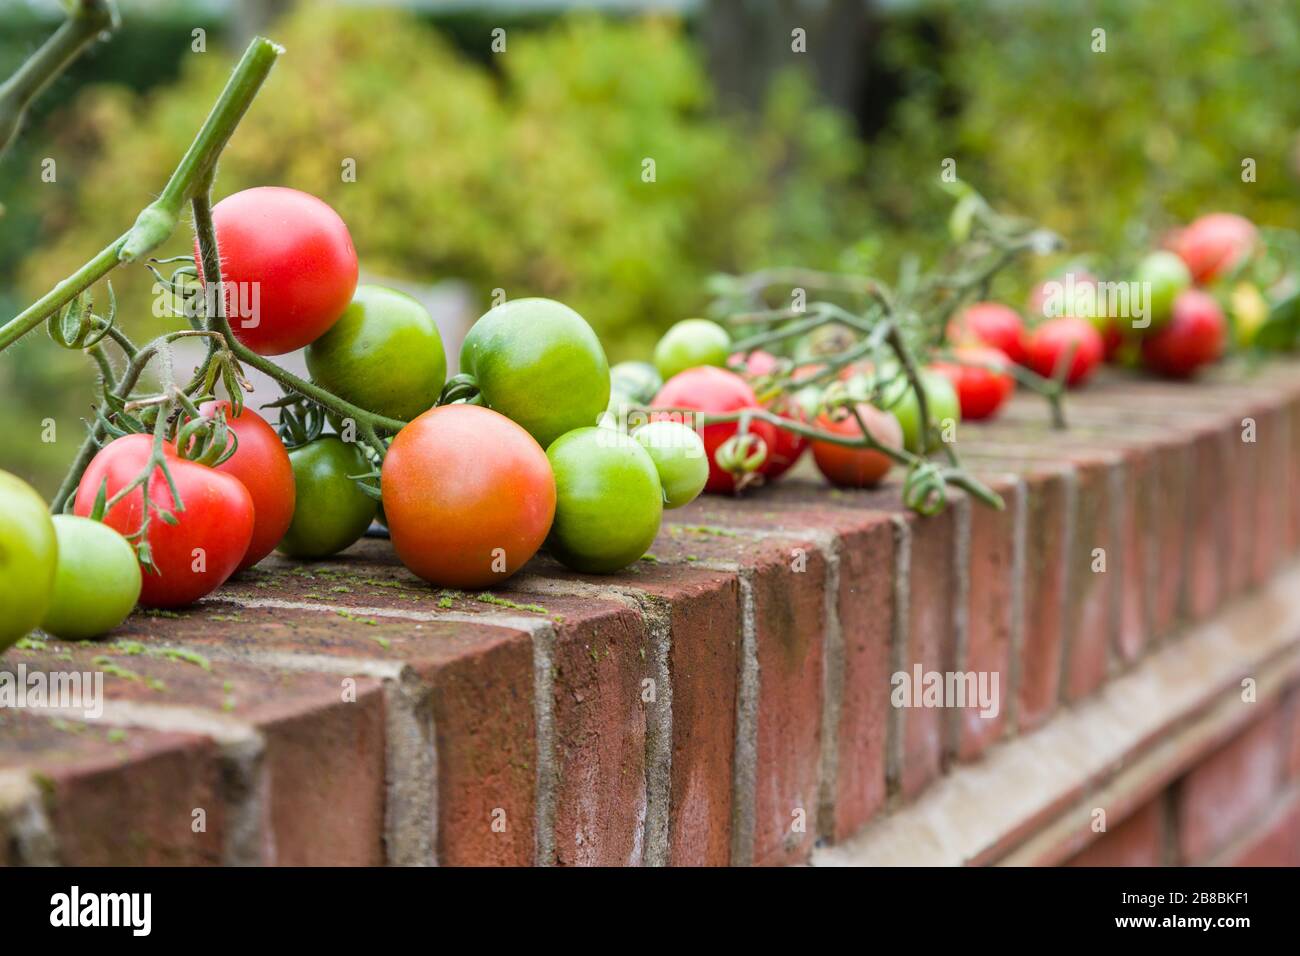 Homegrown vegetable produce, harvested ripening tomatoes on vines,  UK Stock Photo